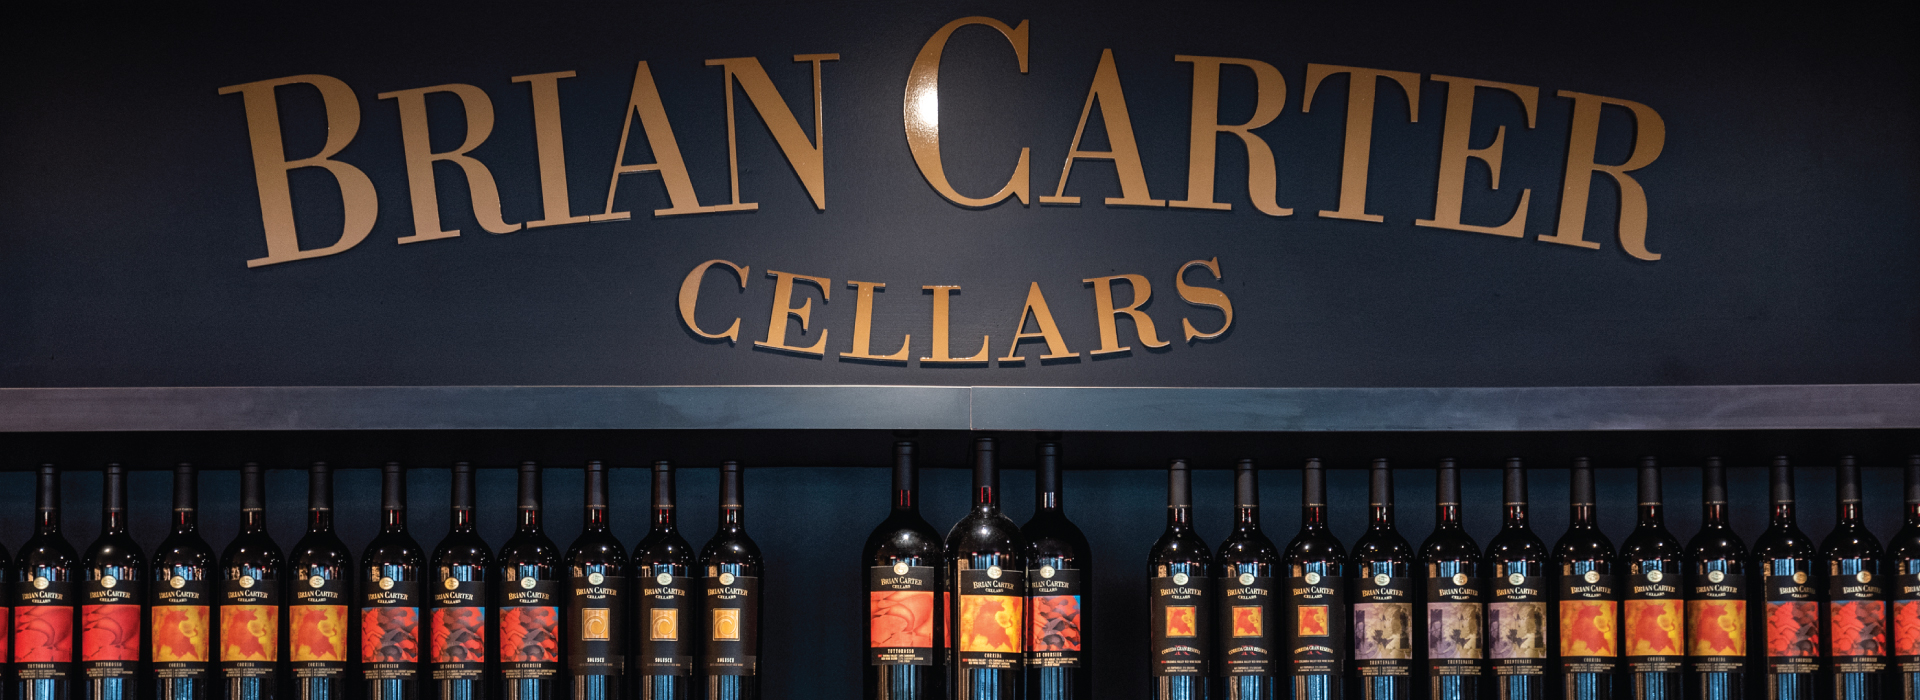 About Our Wine at Brian Carter Cellars